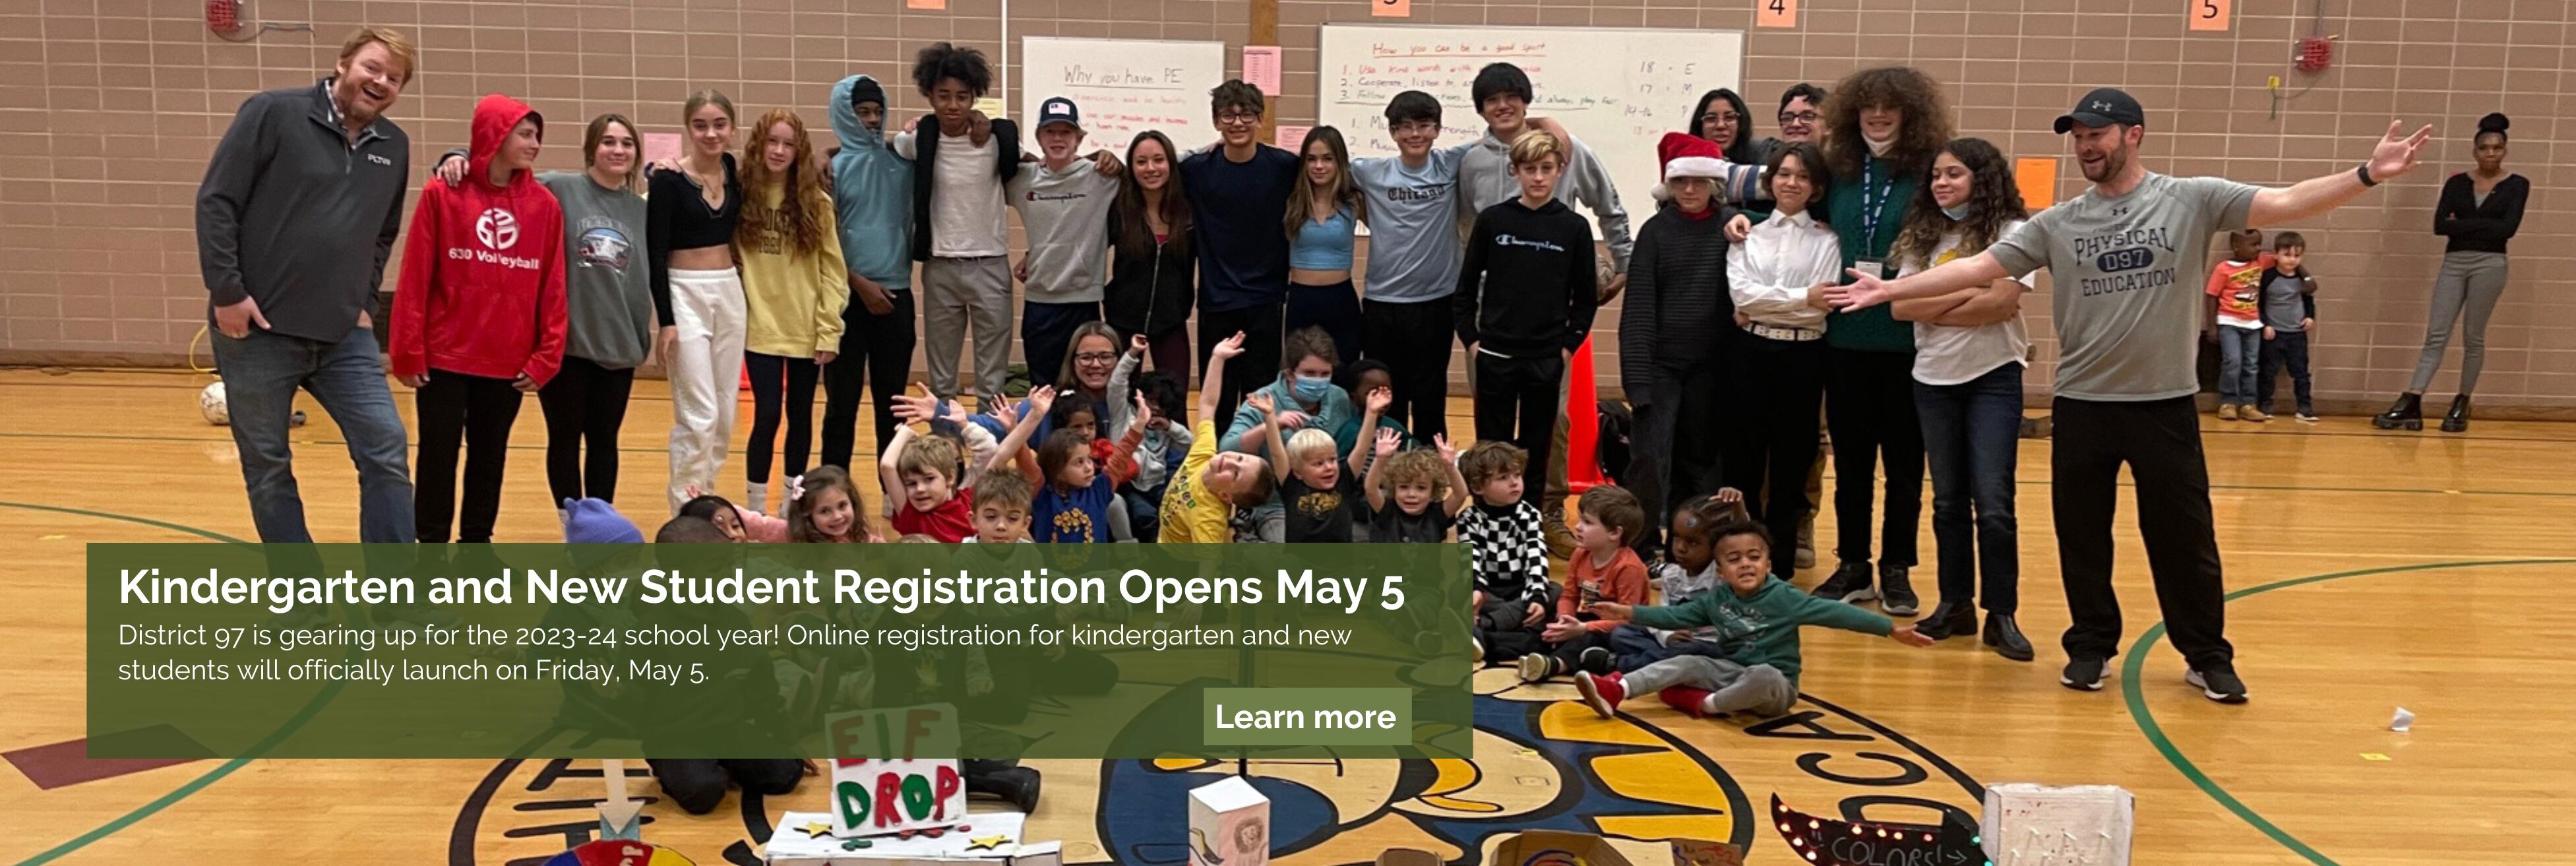 Kindergarten and New Student Registration Opens May 5